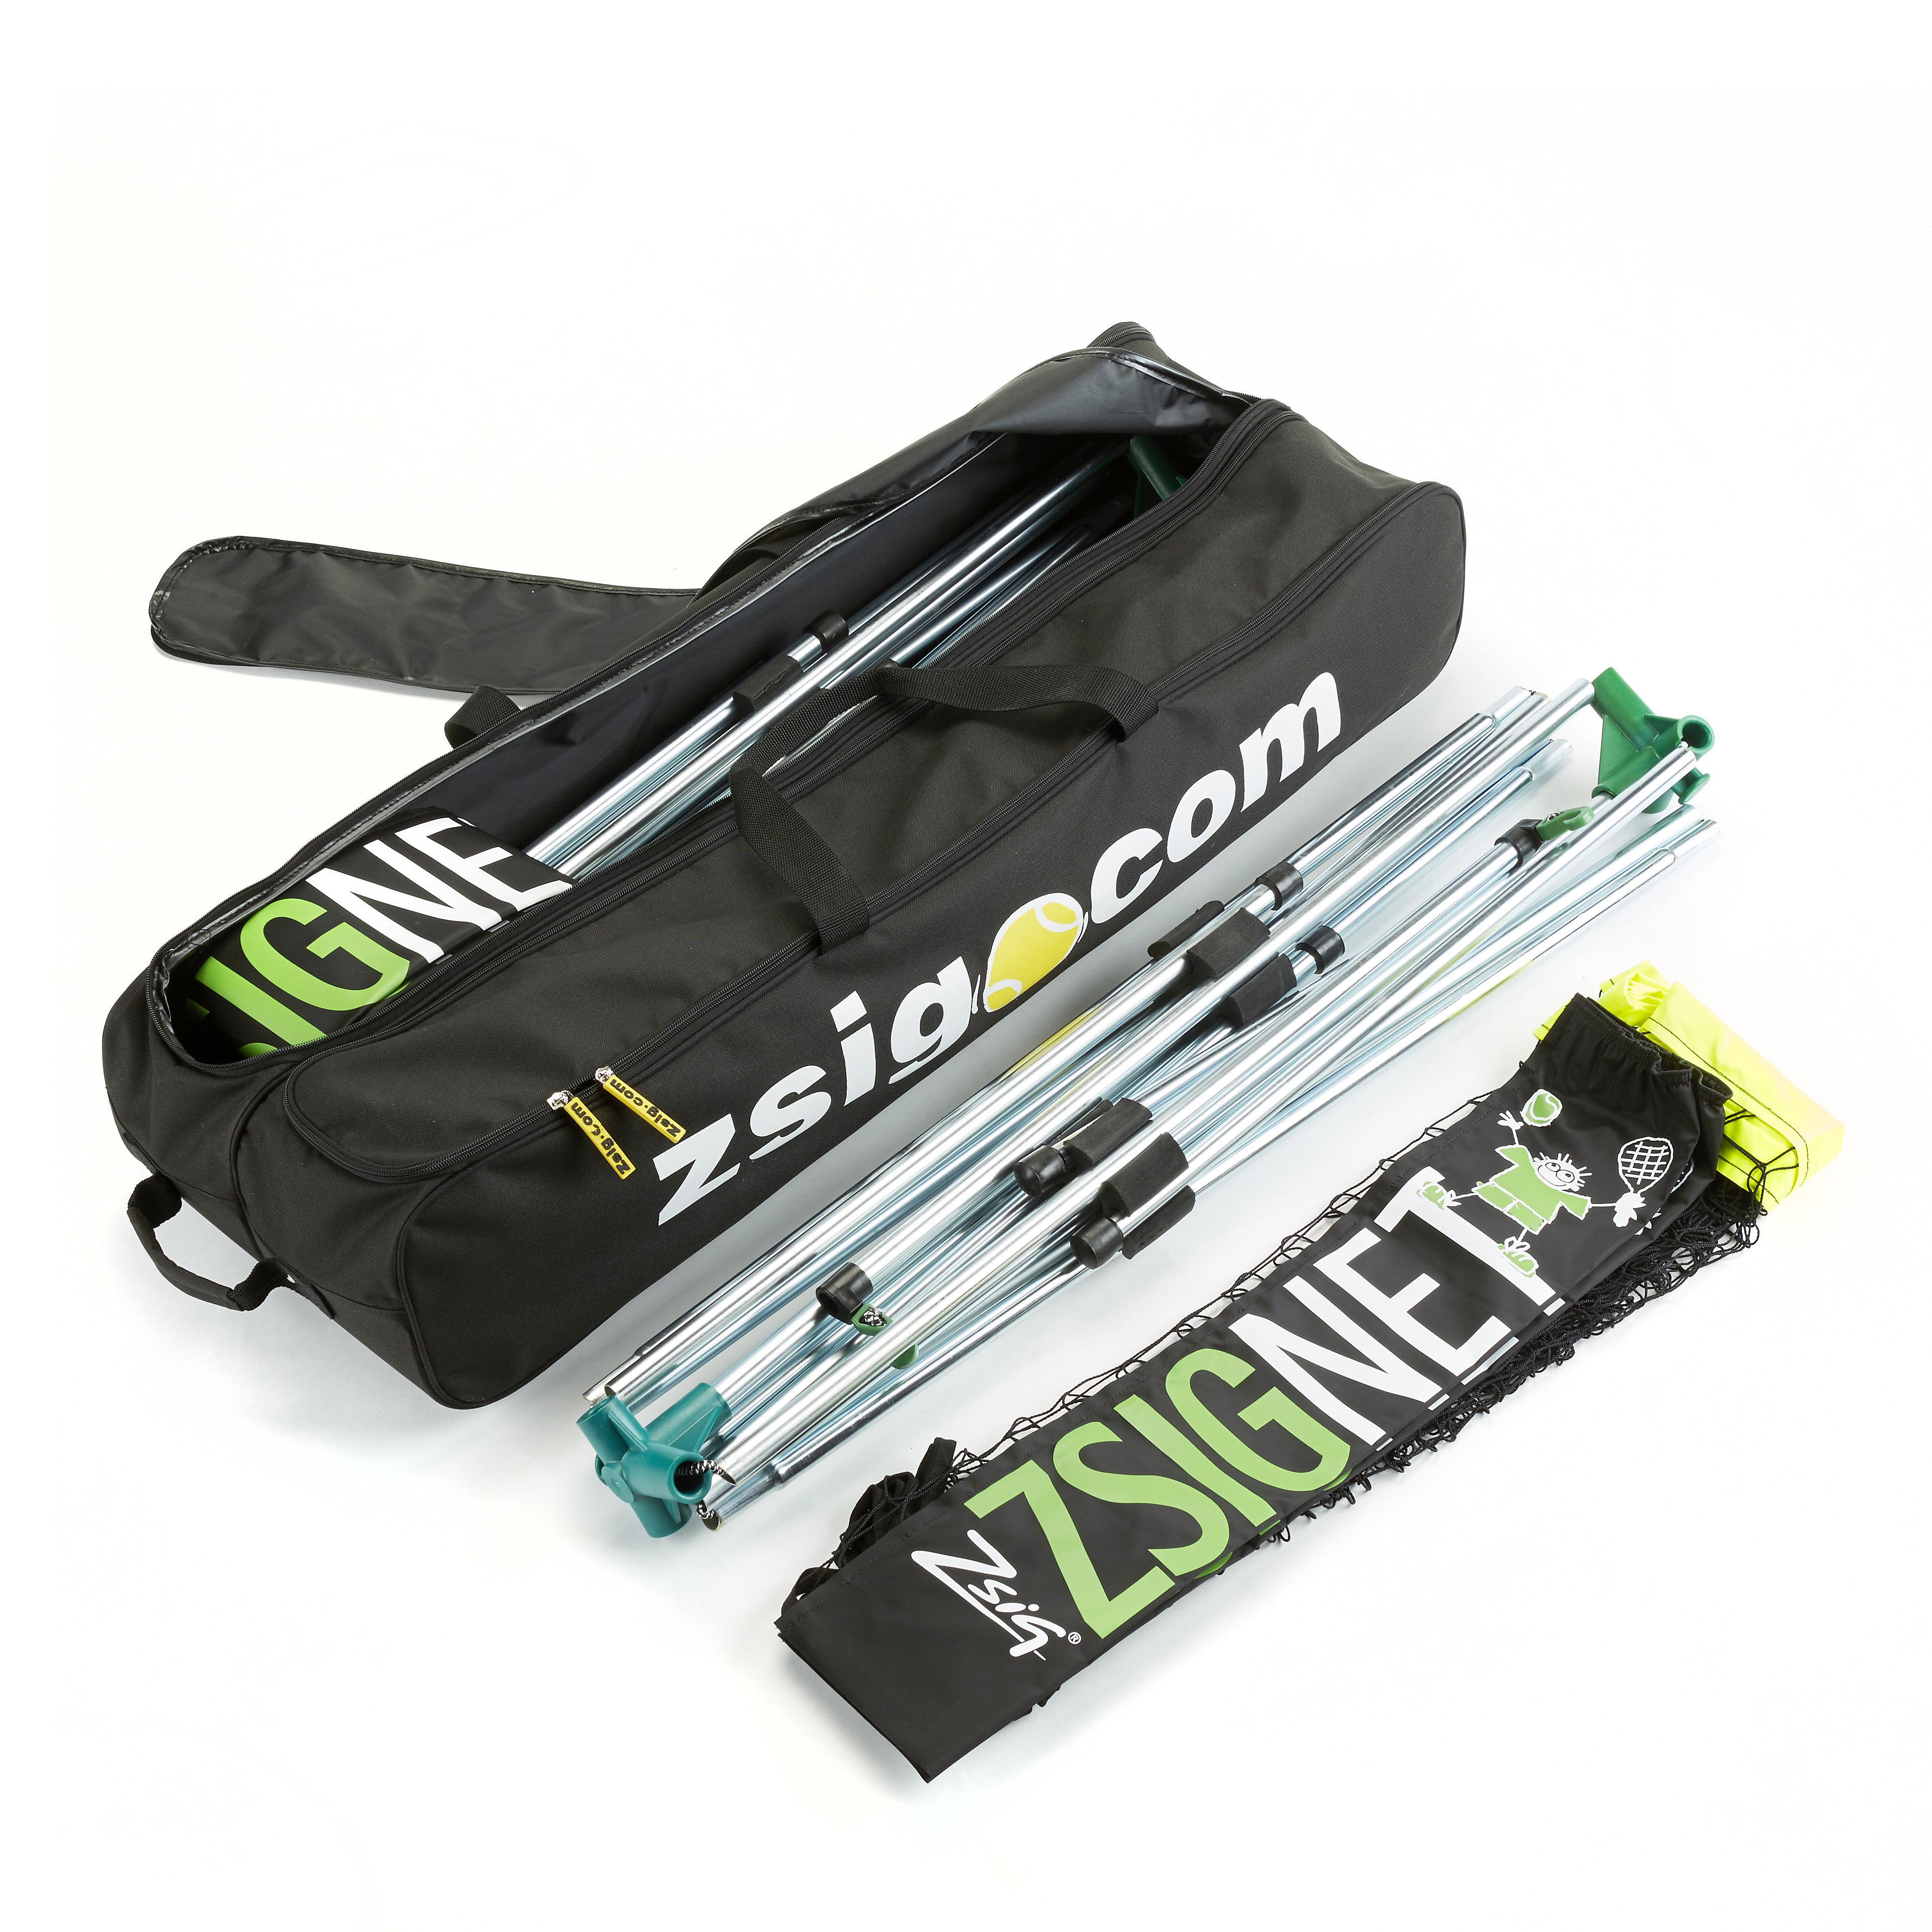 New Zsig holdall for a pair of 6m Mini Tennis Nets, showing inside compartments & size compared to a folded frame